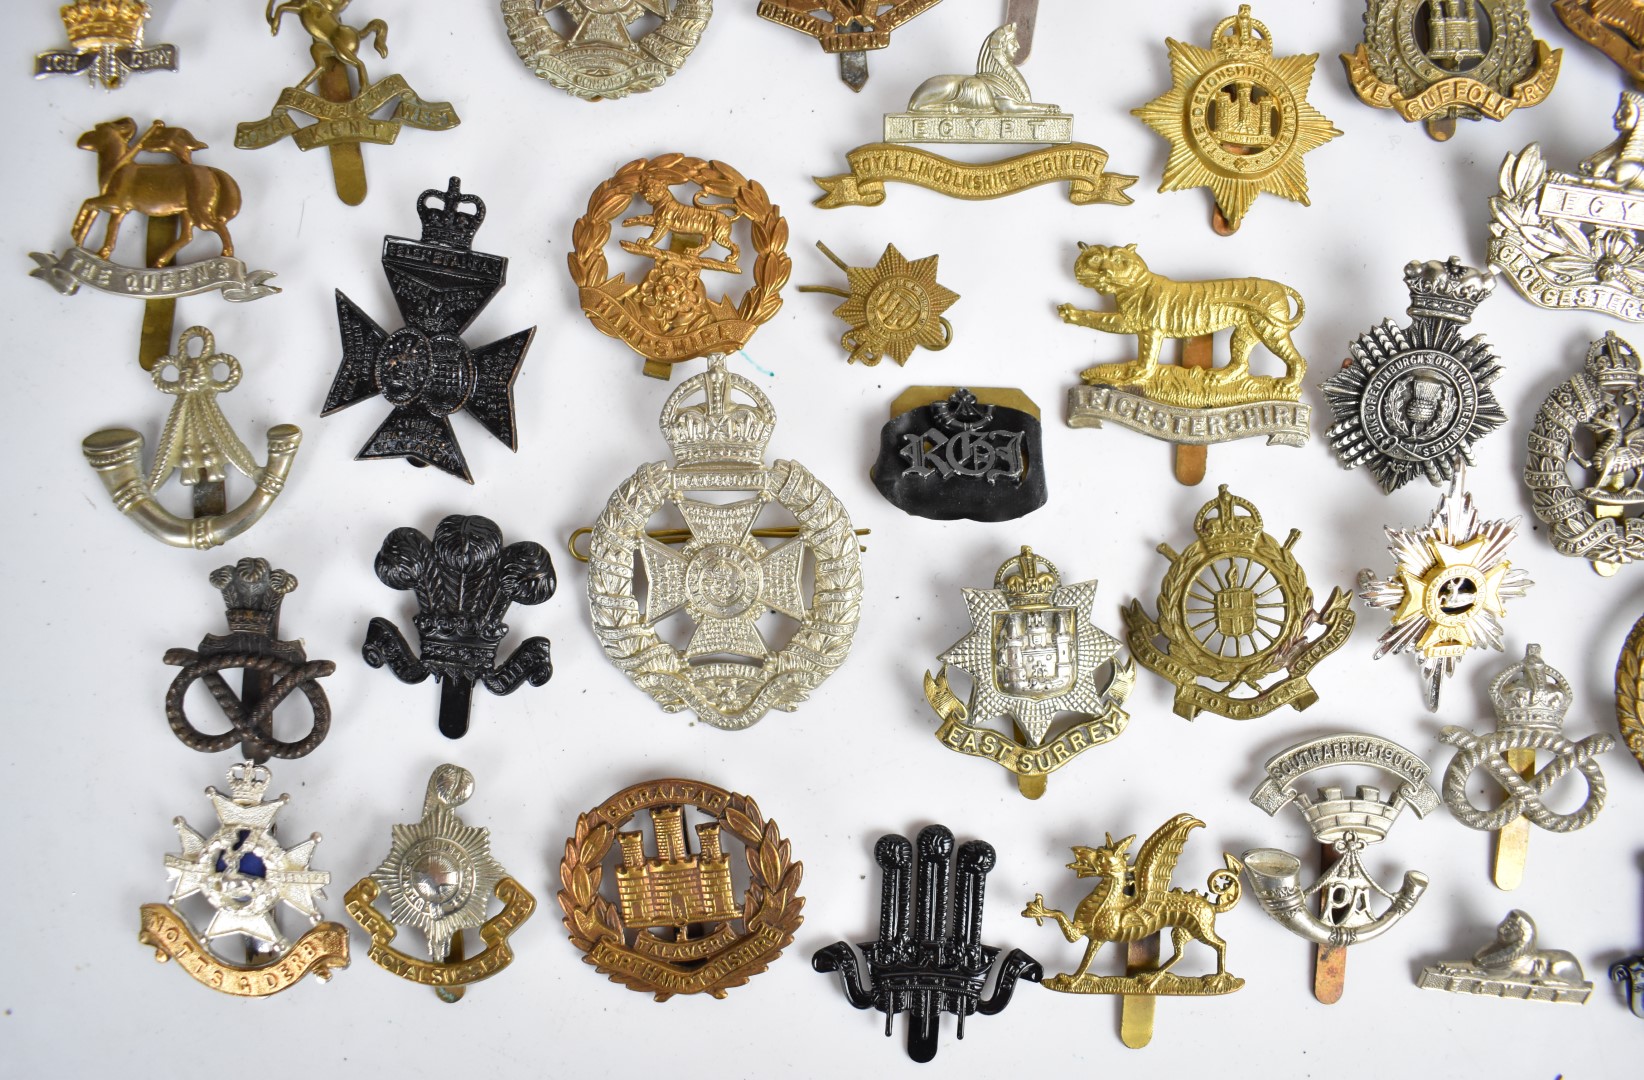 Large collection of approximately 100 British Army cap badges including Royal Sussex Regiment, - Image 9 of 14